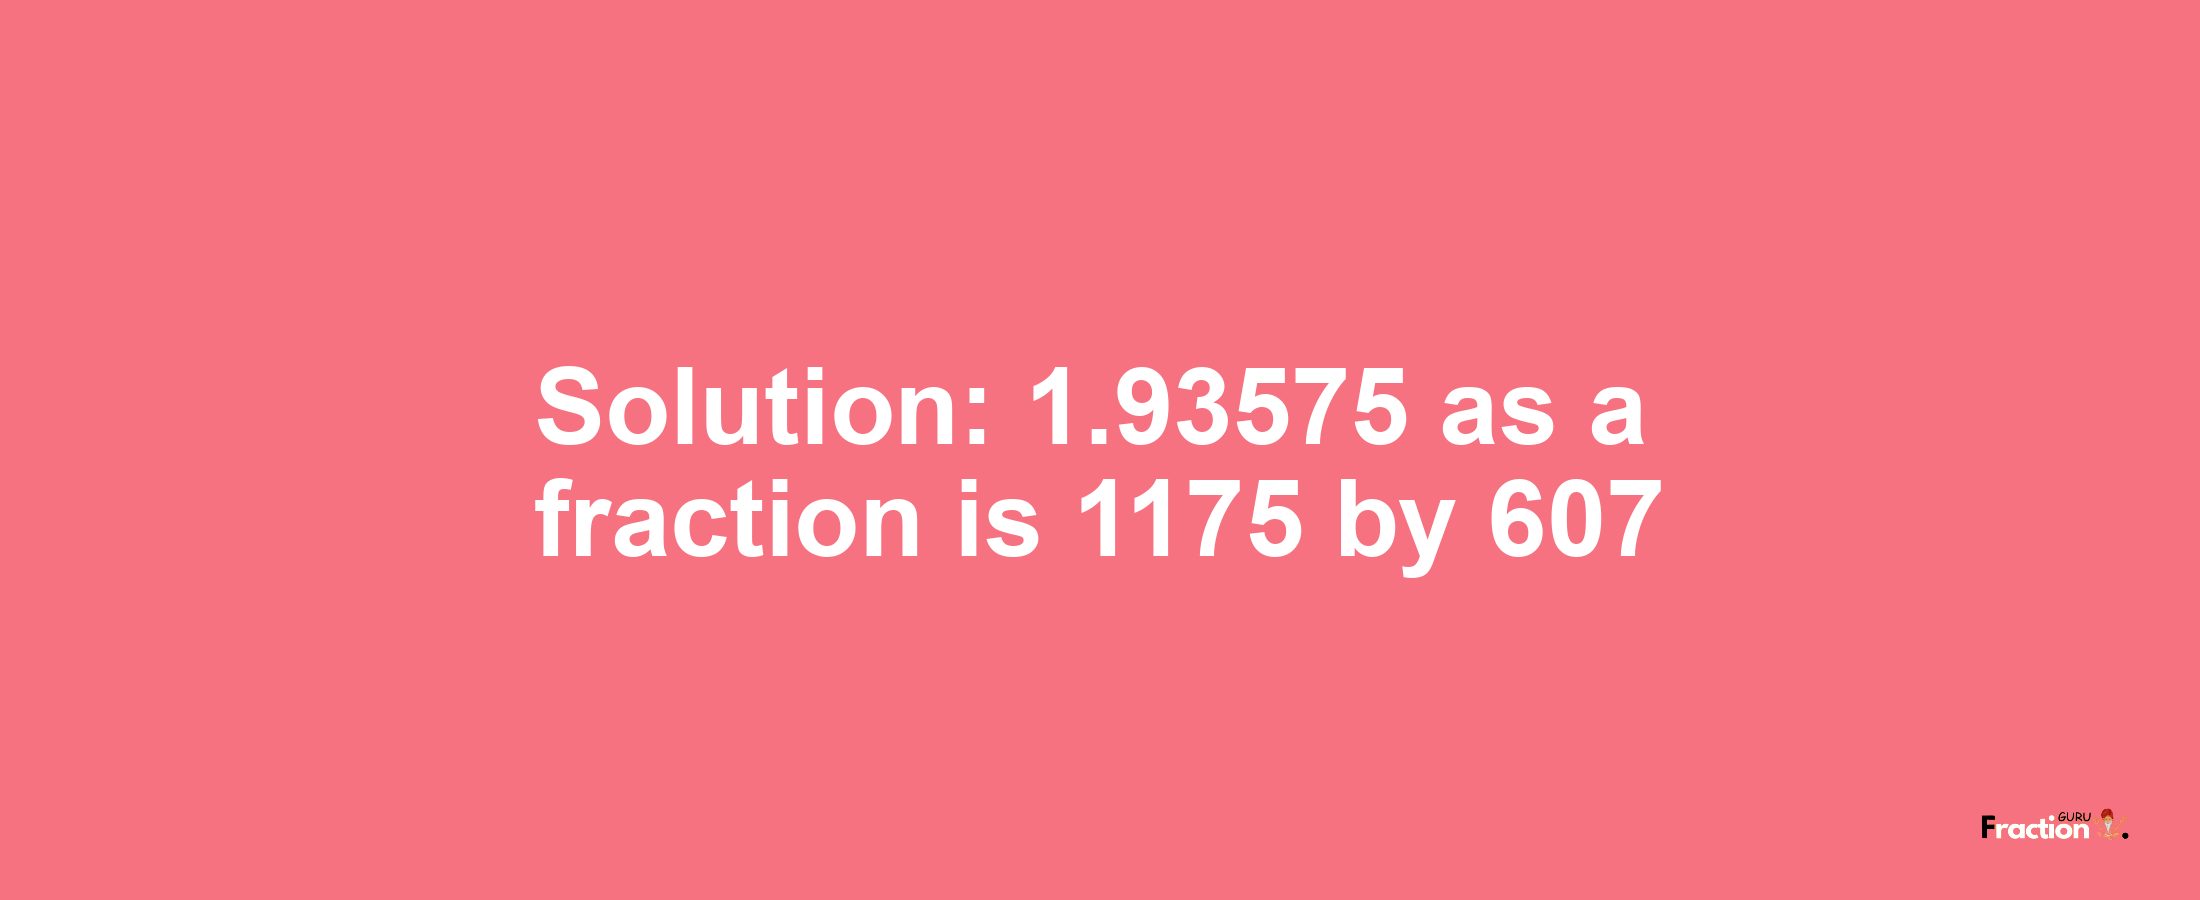 Solution:1.93575 as a fraction is 1175/607